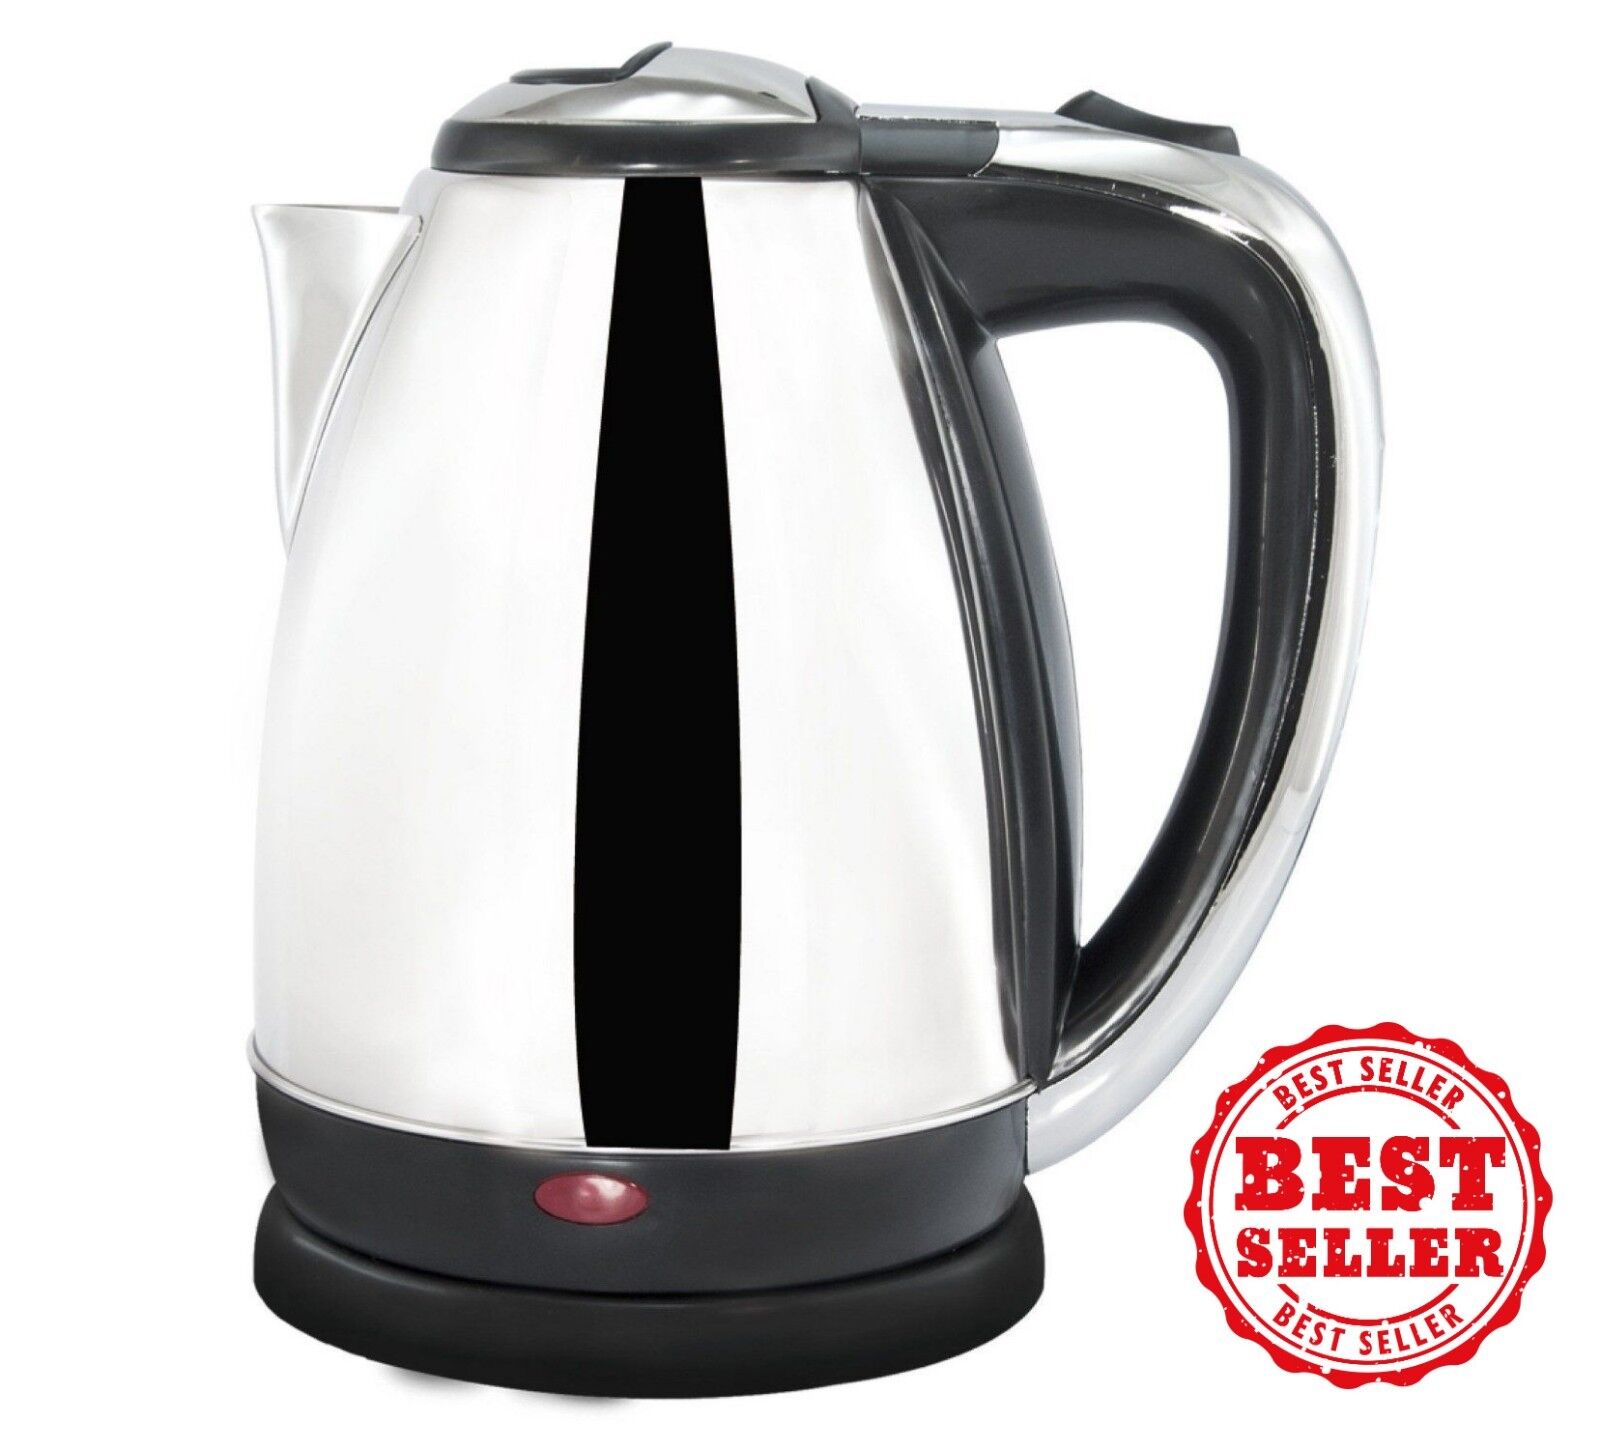 Stainless Steel Electric Tea Kettle With Light Indicator,1.9 QT Silver 